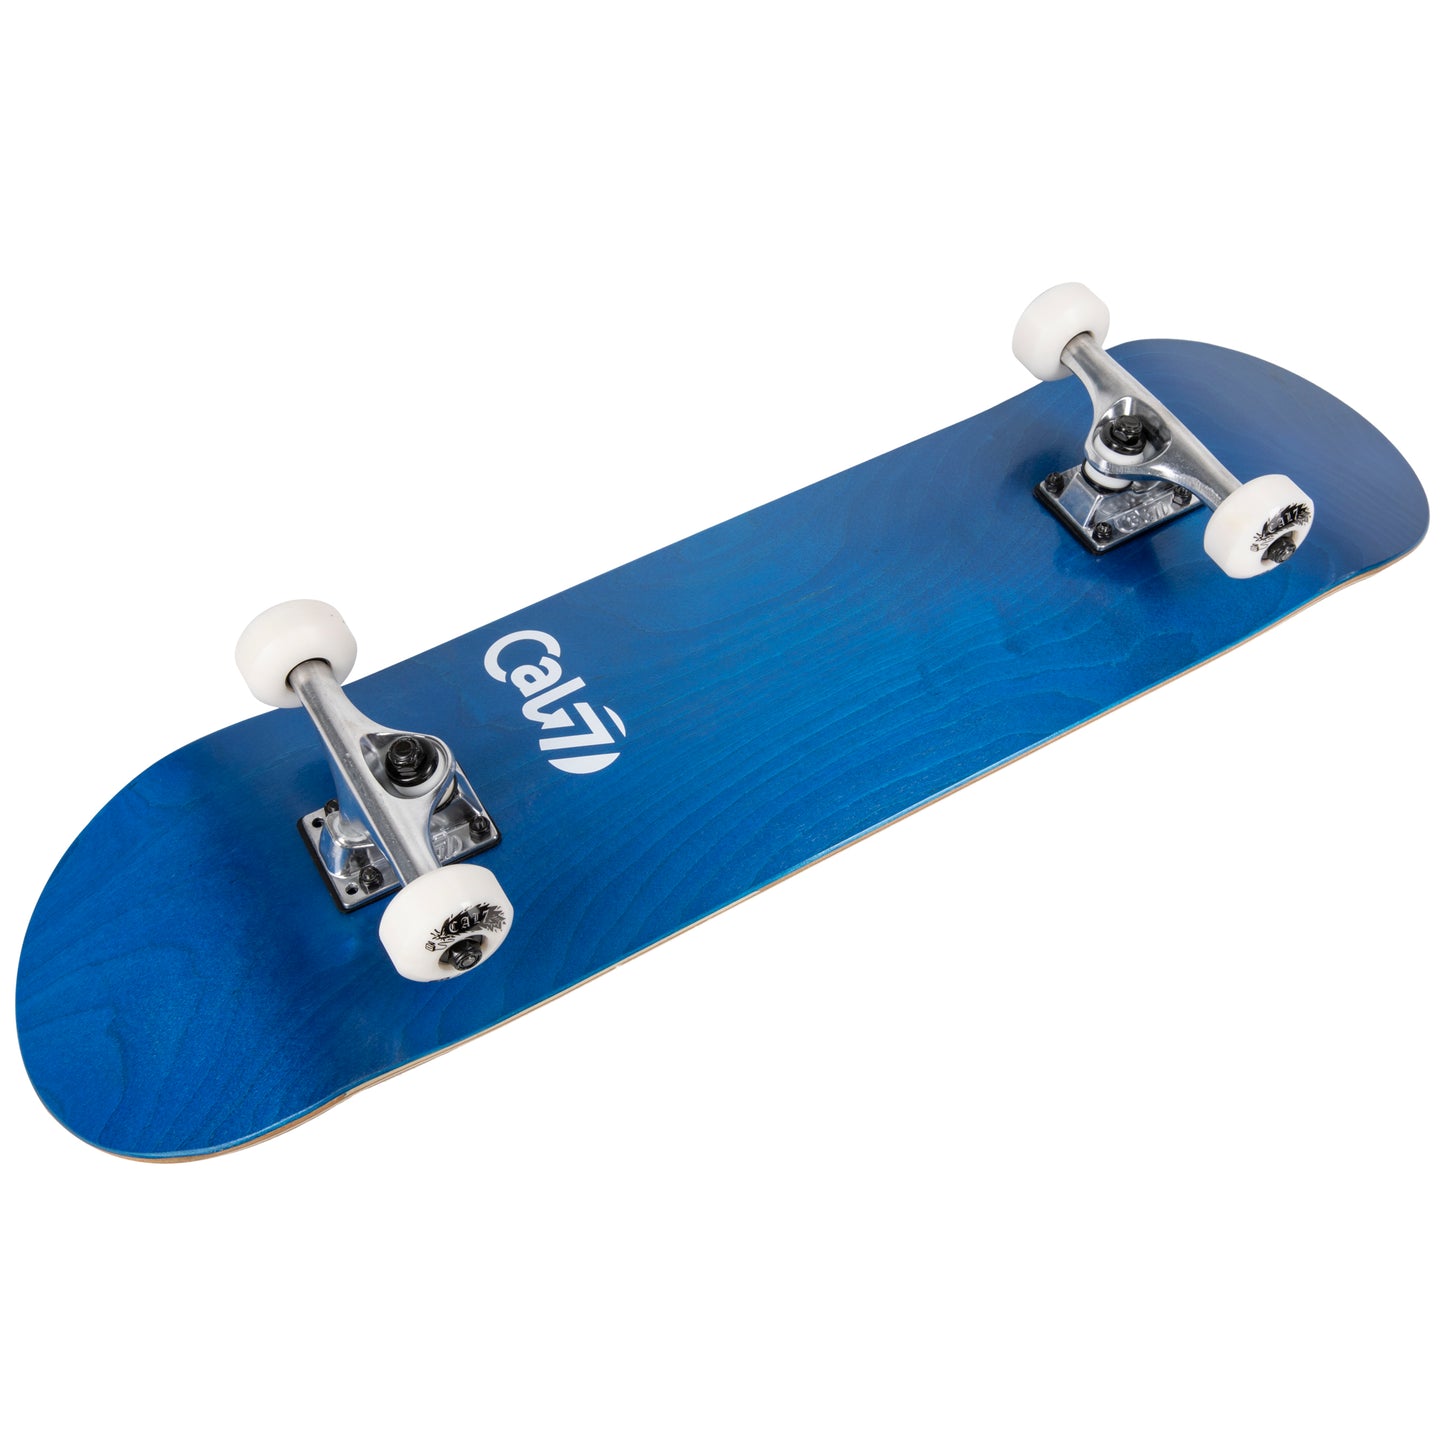 Cal 7 Complete 7.5/7.75/8-Inch Skateboard Current with Logo and Blue Stain